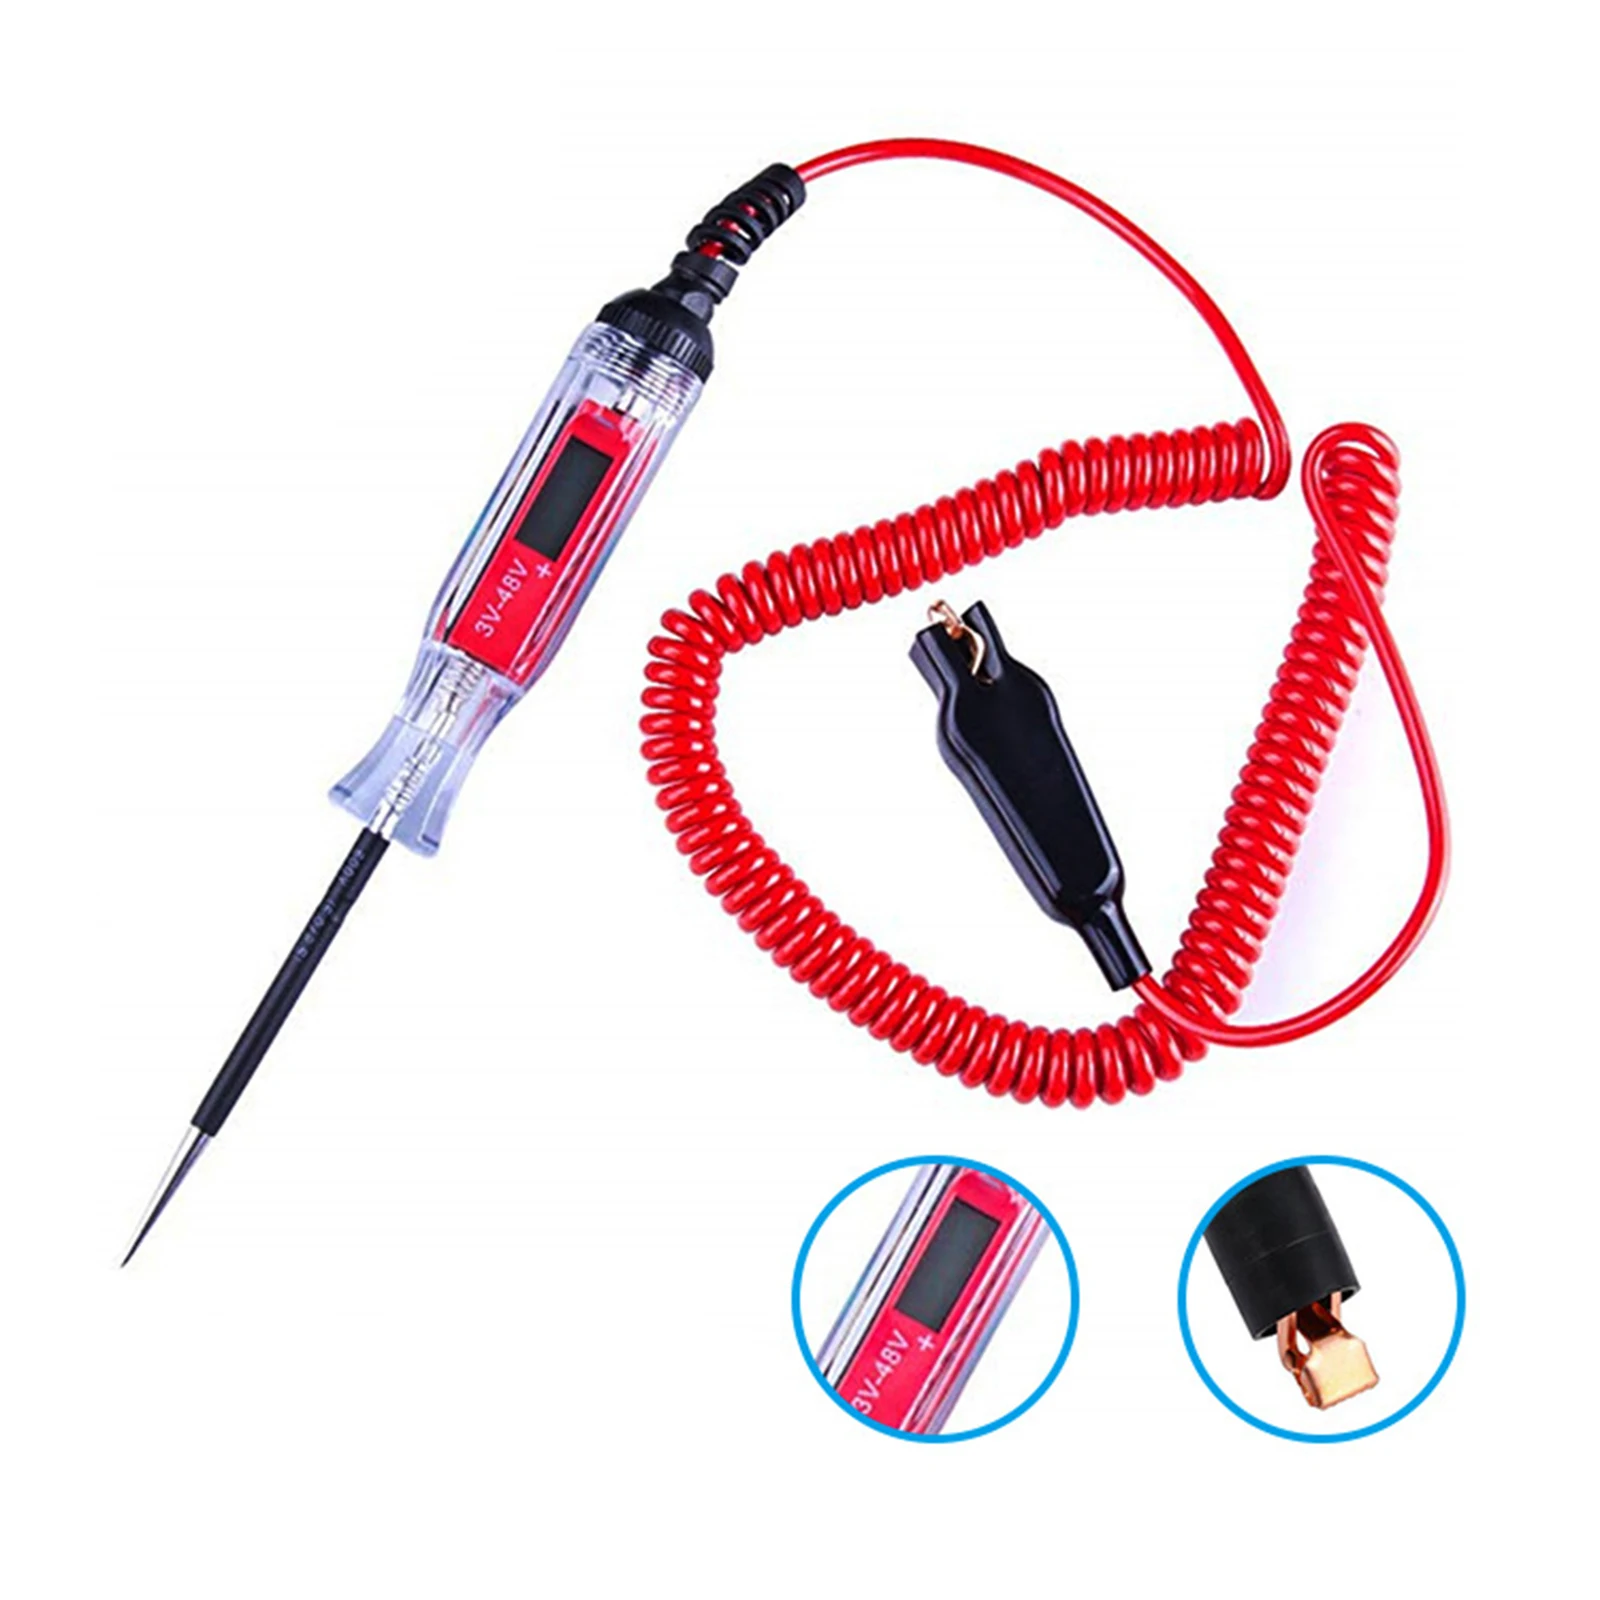 3V~48V LCD Display Electric Circuit Tester for Light Voltage Car Boat Automobiles Yachts Yuses RVs